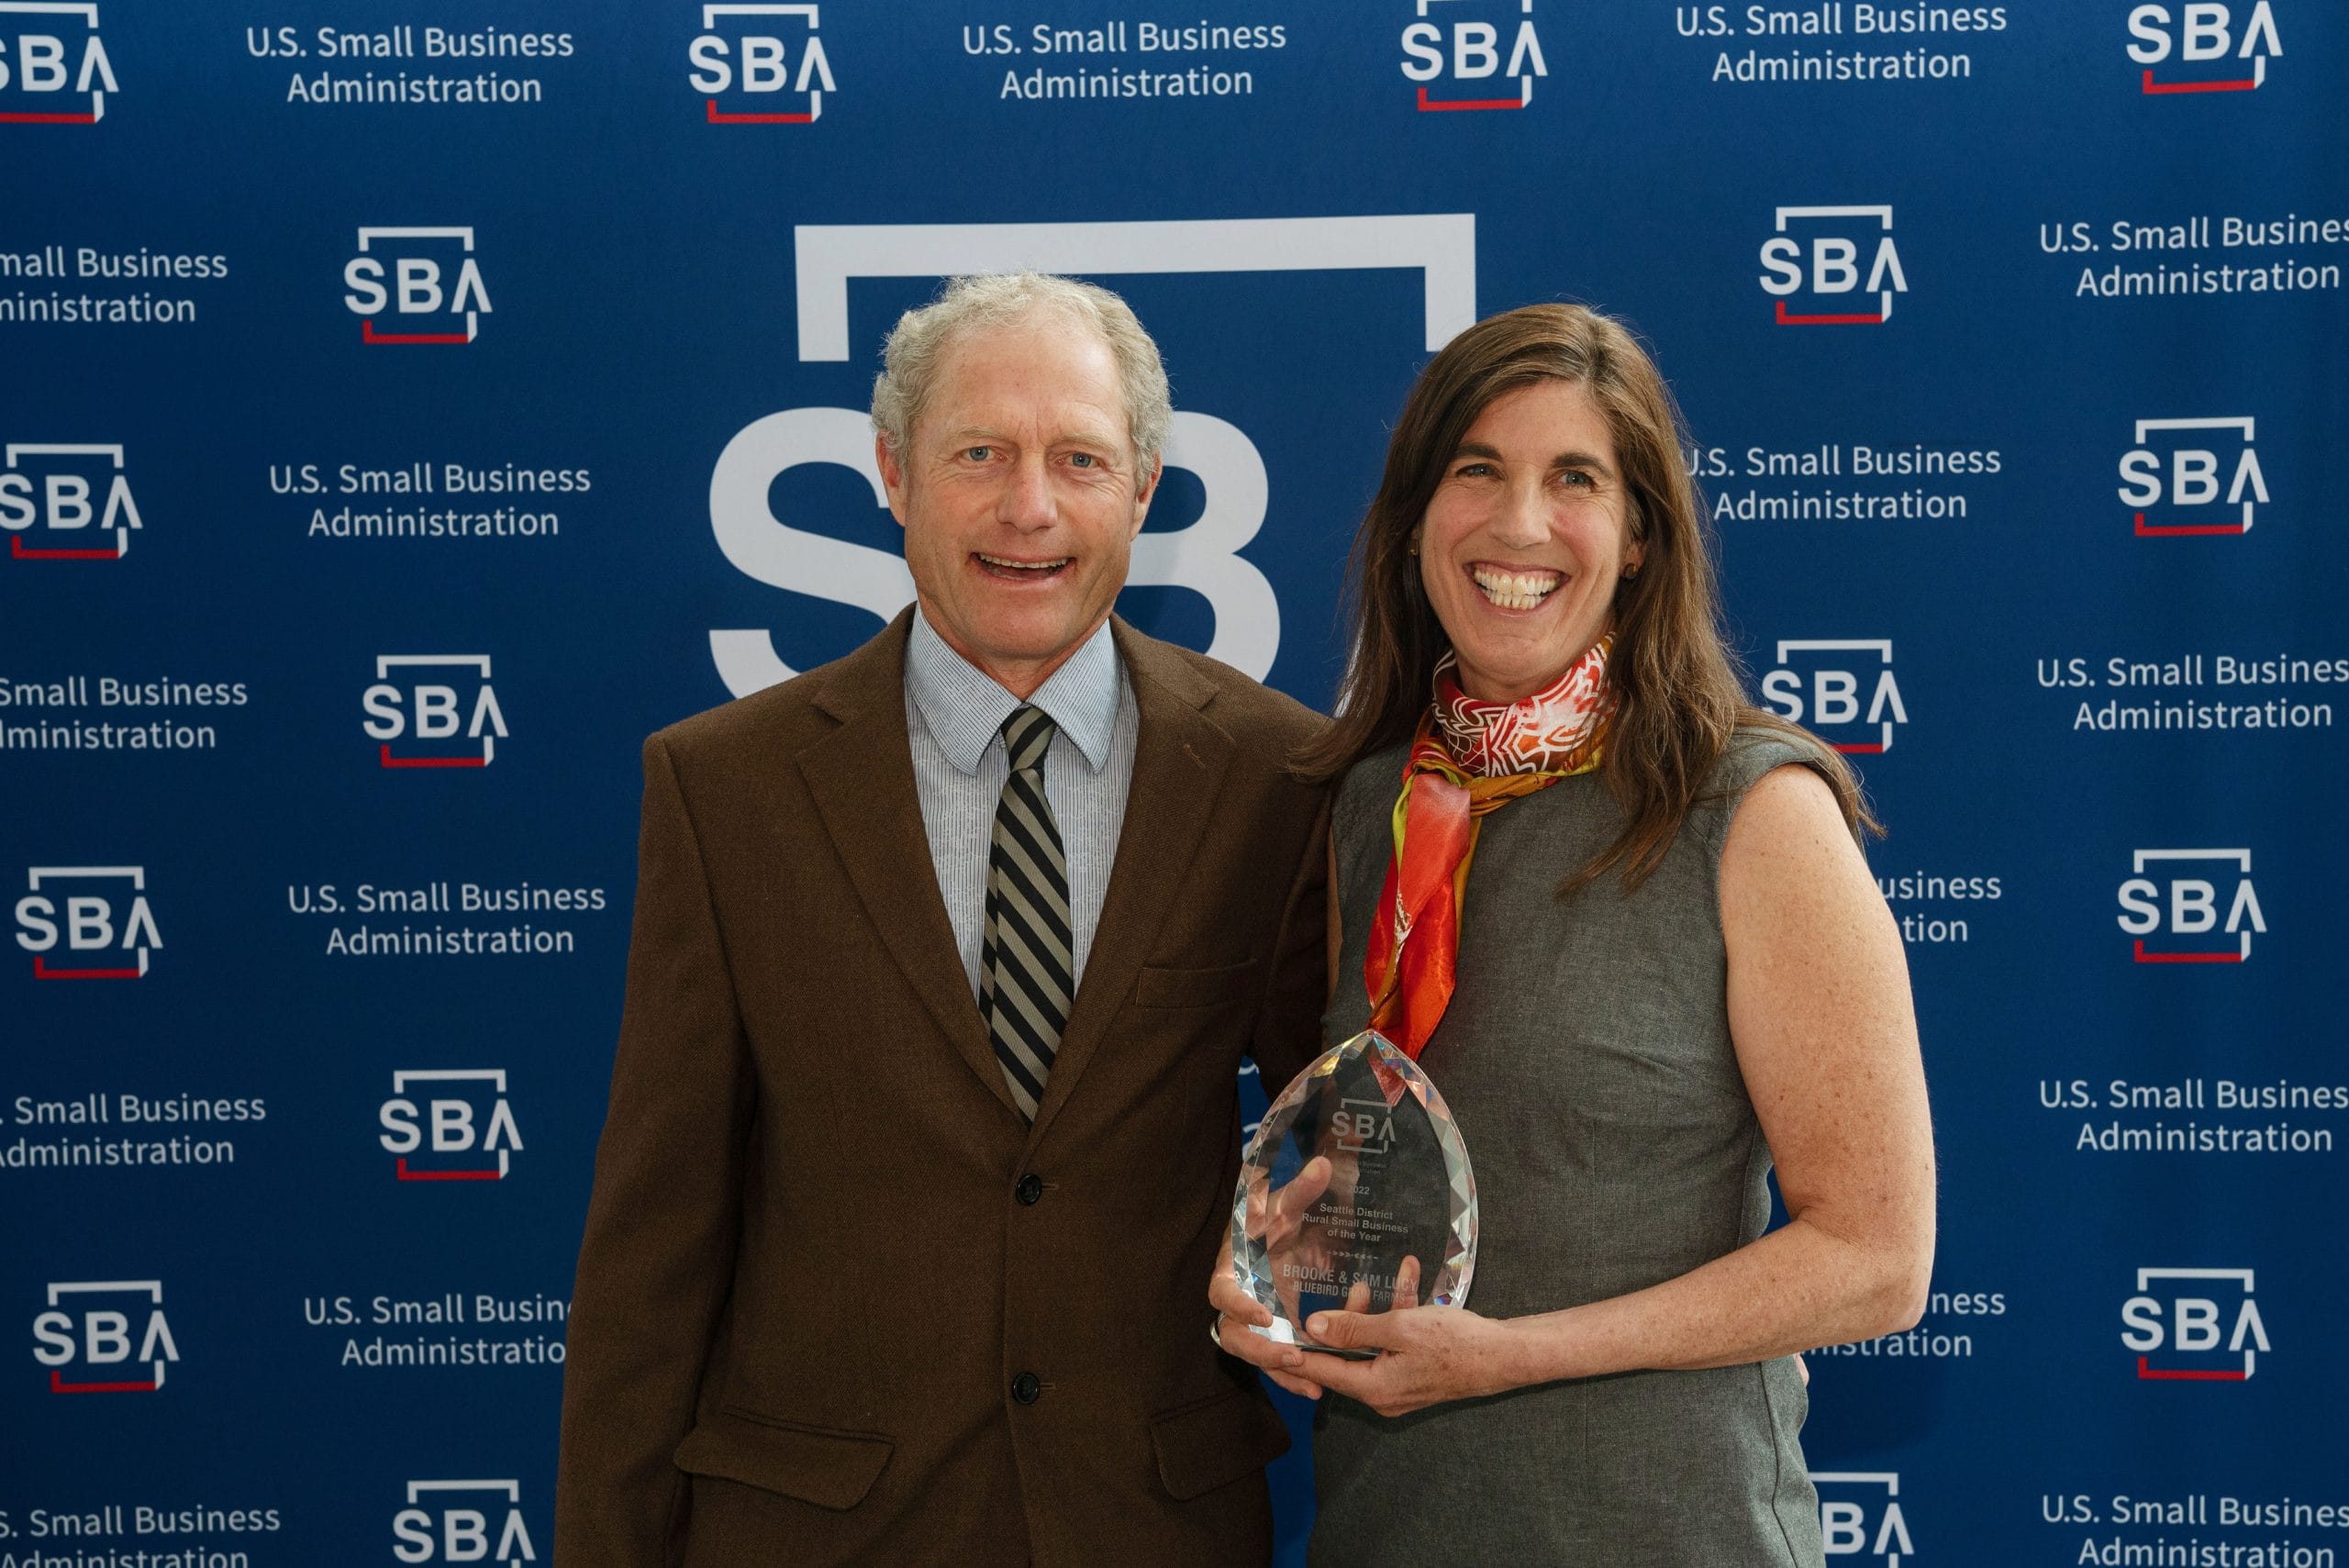 Brooke and Sam received the SBA Seattle District Rural Small Business of the Year award at the Museum of Flight in Seattle.